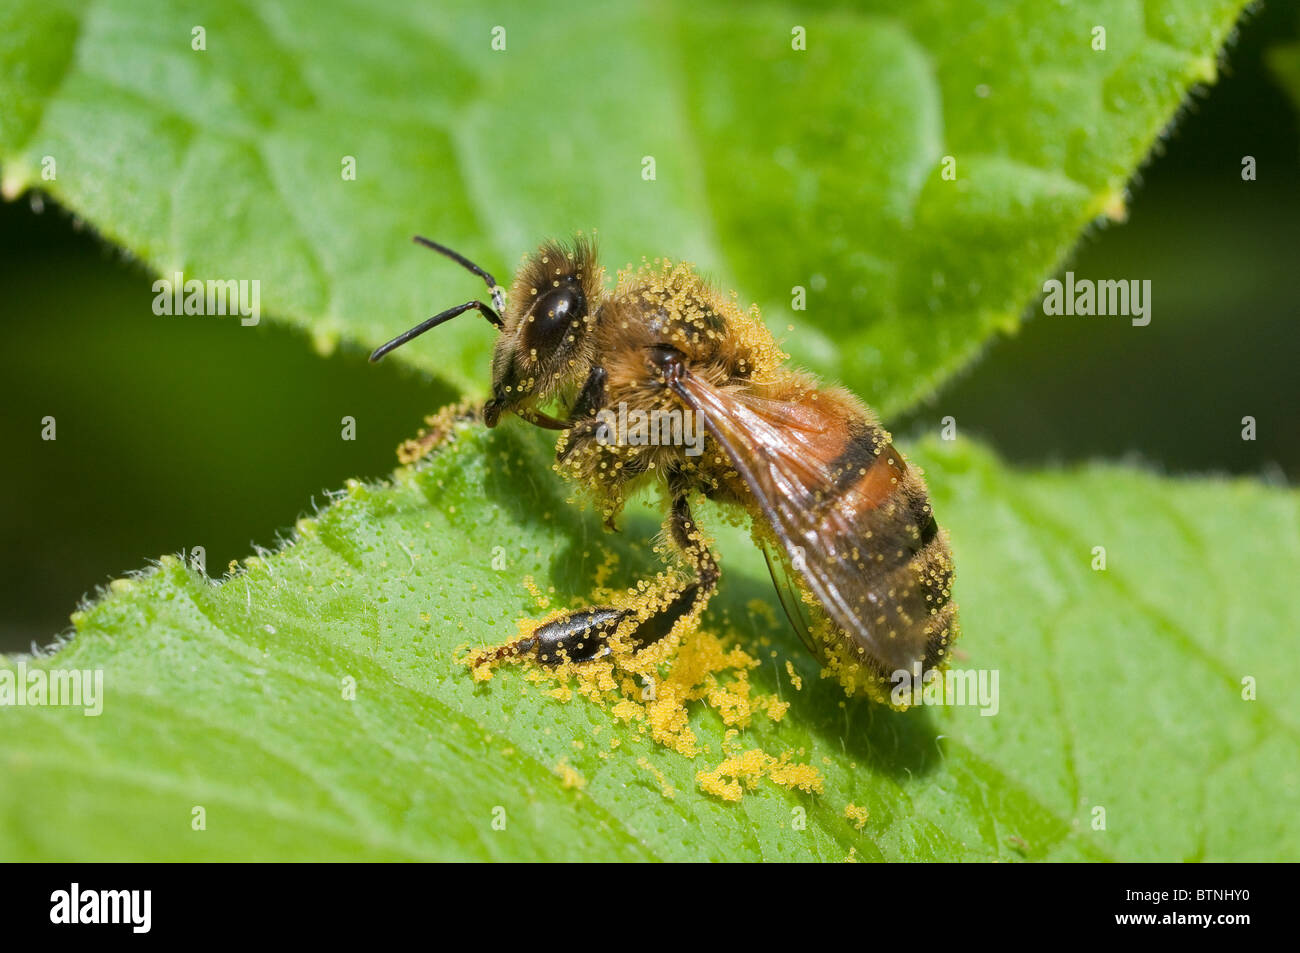 Honey bee cleaning off pollen collected from a courgette flower Stock Photo